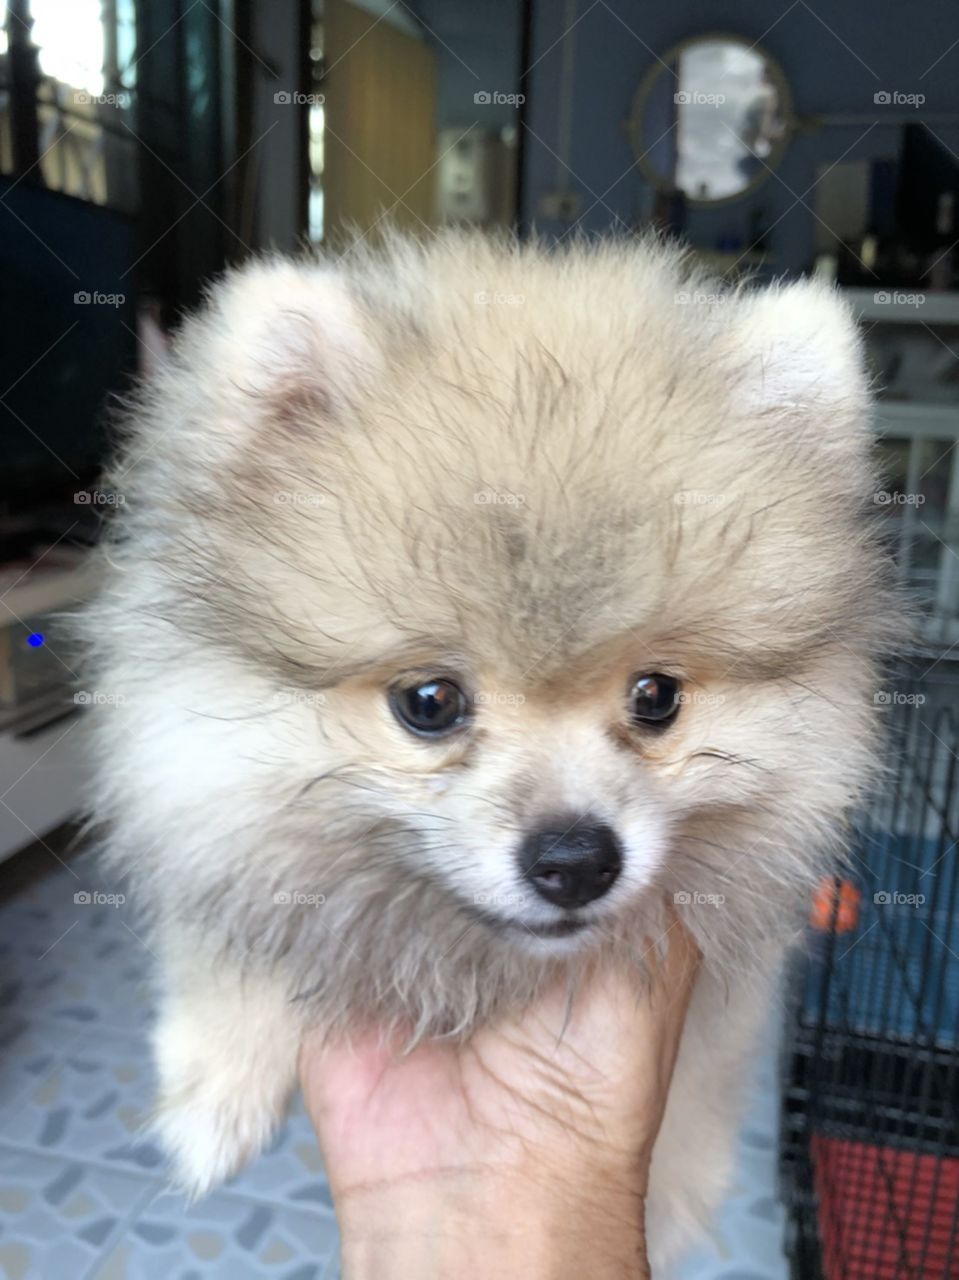 soft brown female puppy "pomeranian" on the hand.